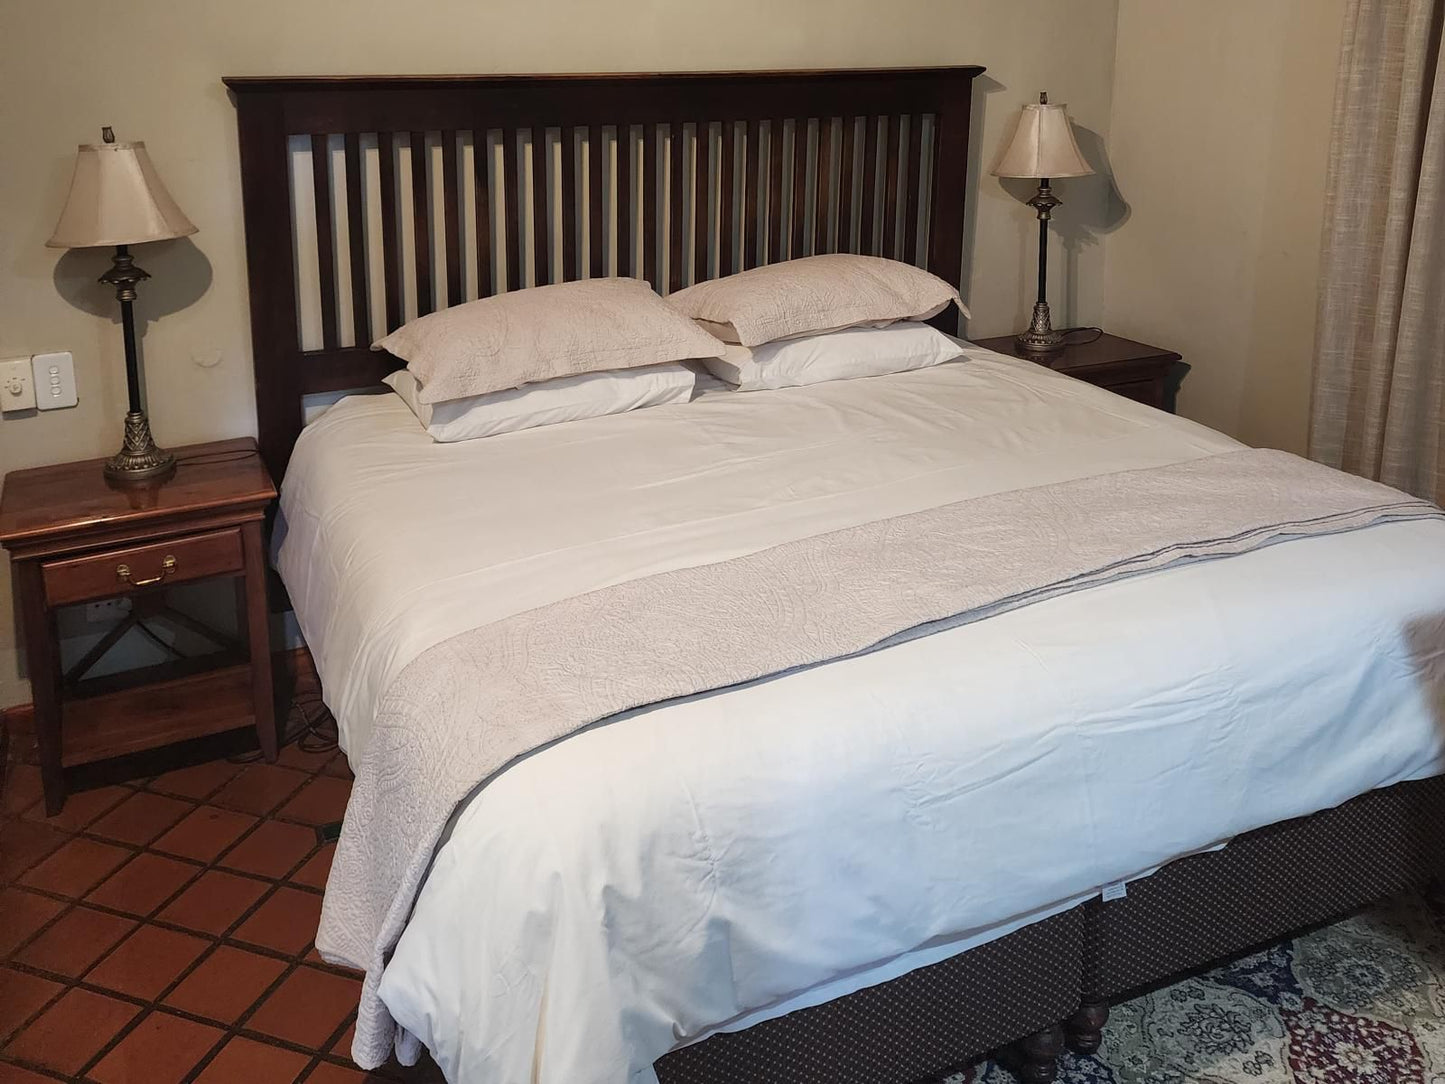 Fairview Hotels Spa And Golf Resort Tzaneen Limpopo Province South Africa Bedroom